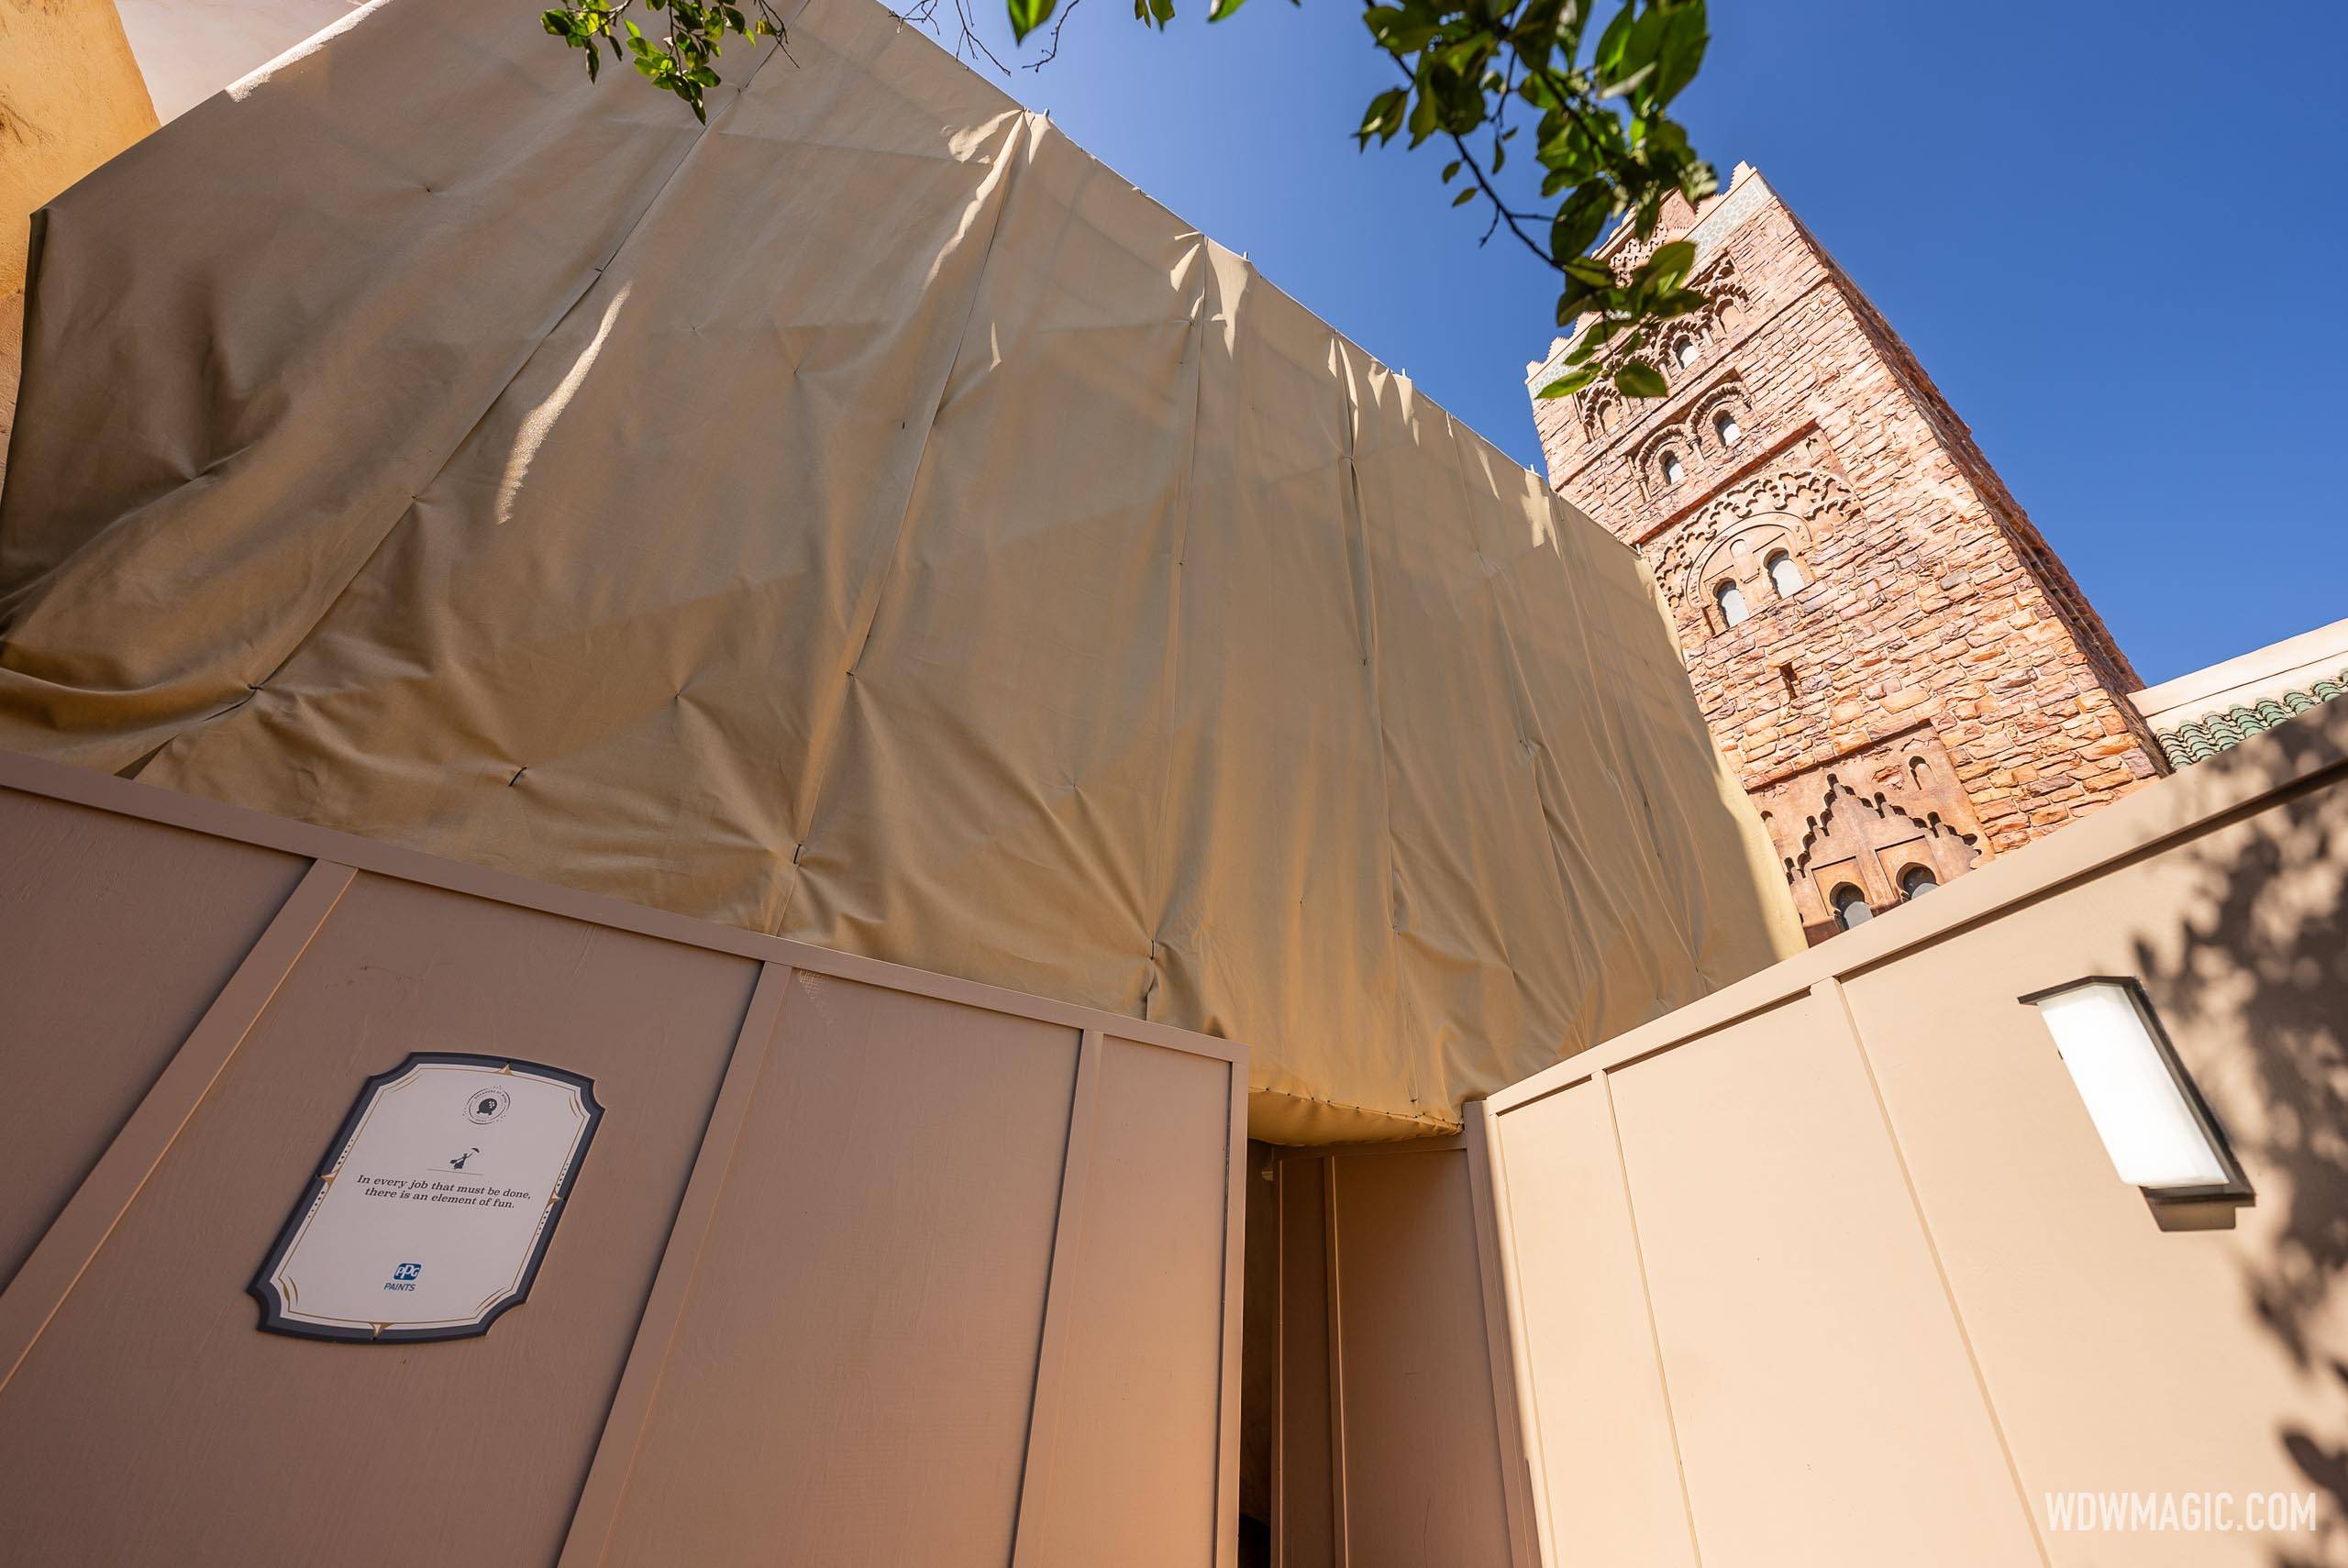 Large section of EPCOT's Morocco pavilion goes behind refurbishment walls